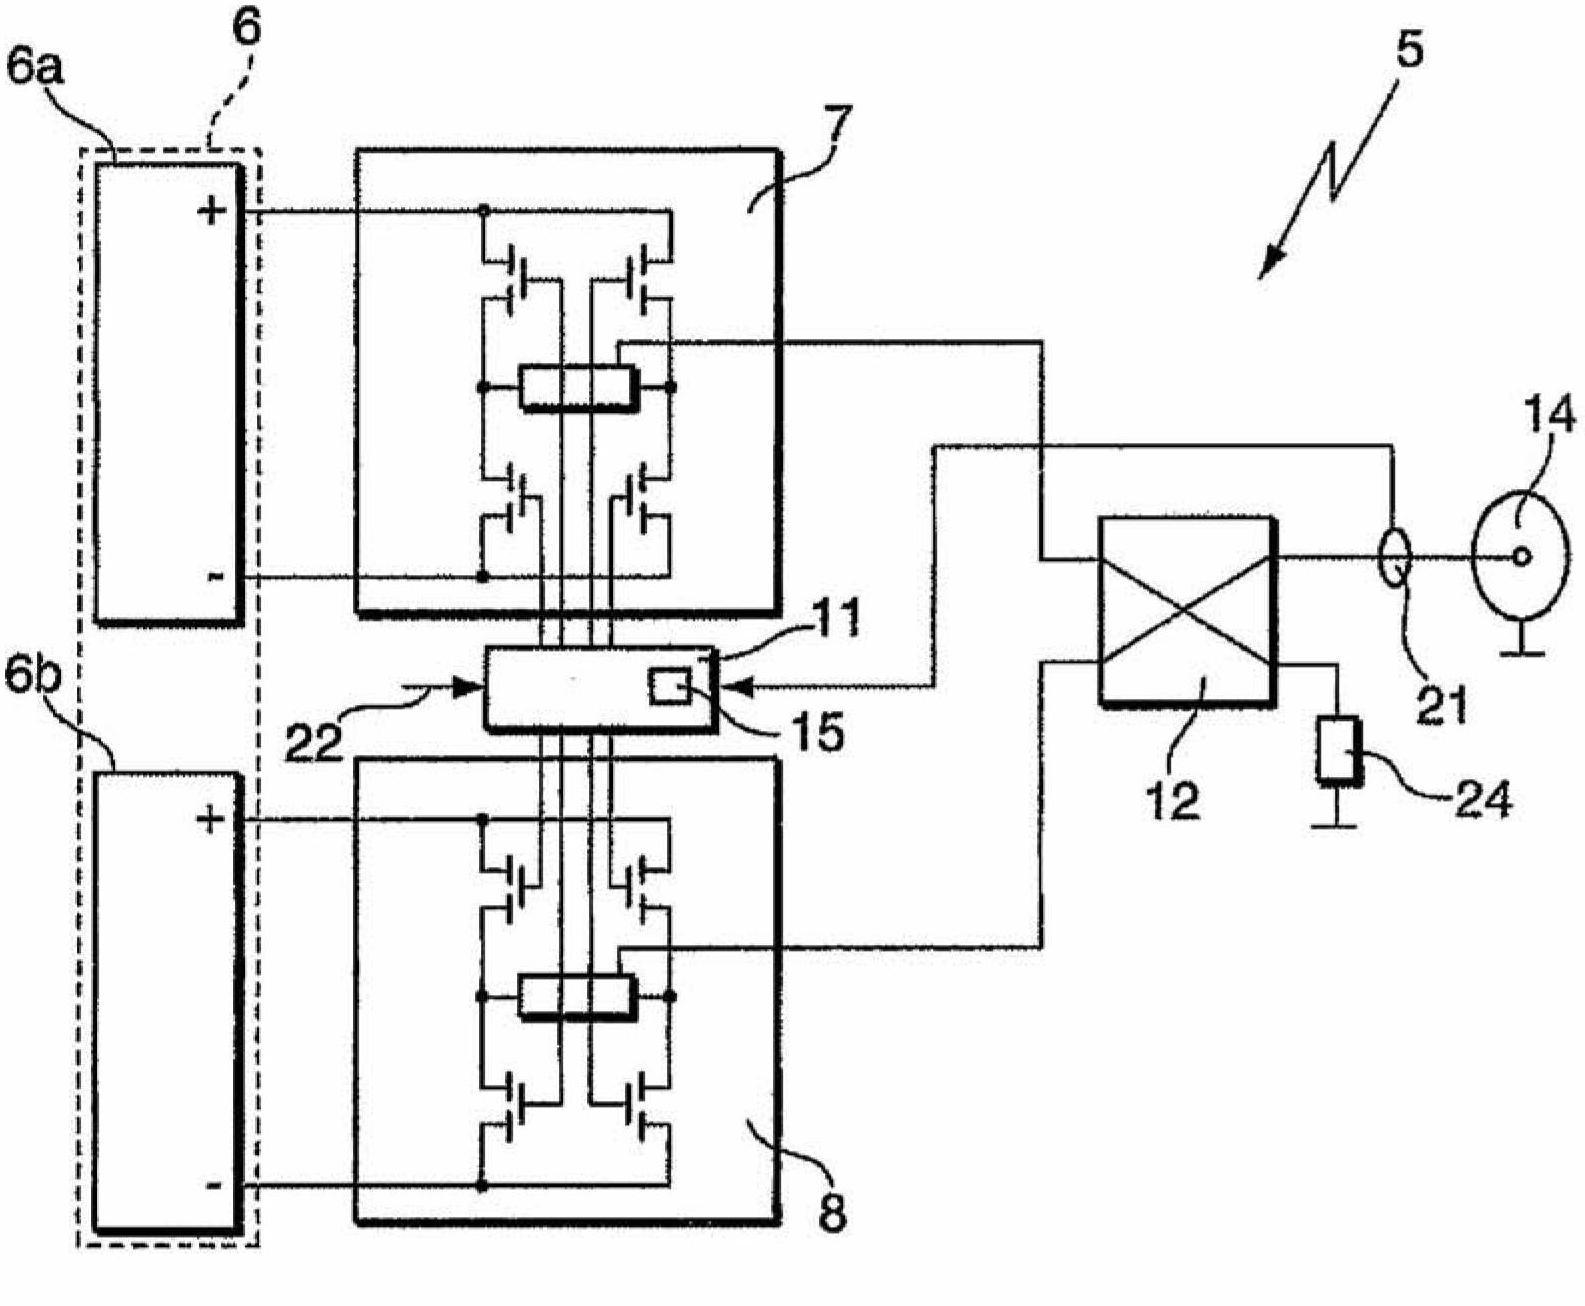 Method for operating an industrial process